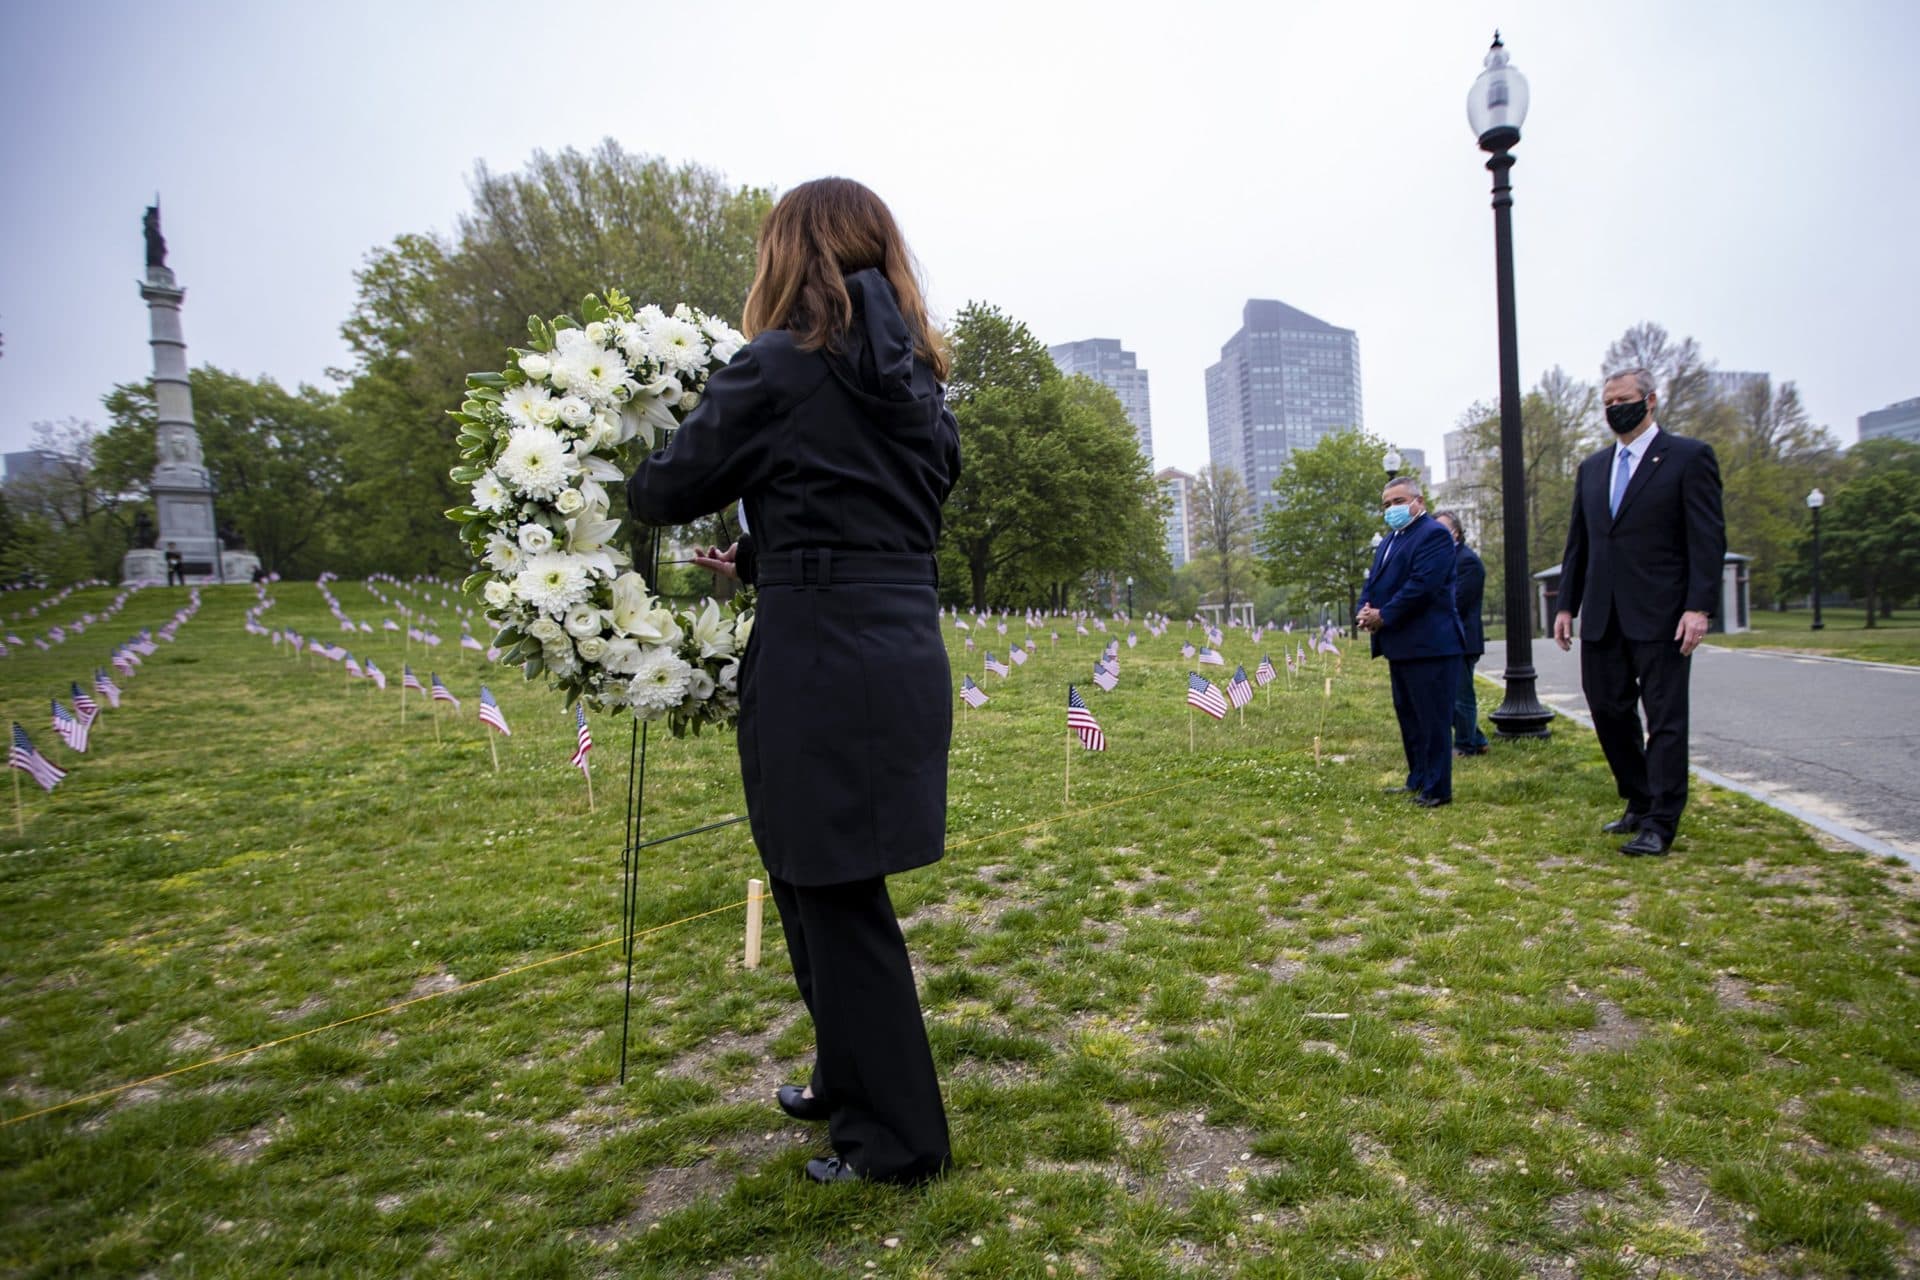 Baker watches as Diane Nealon, executive director of the Massachusetts Military Heroes Fund, places a wreath at the base of the hill where the Soldiers and Sailors Monument in the Boston Common is located. (Jesse Costa/WBUR)